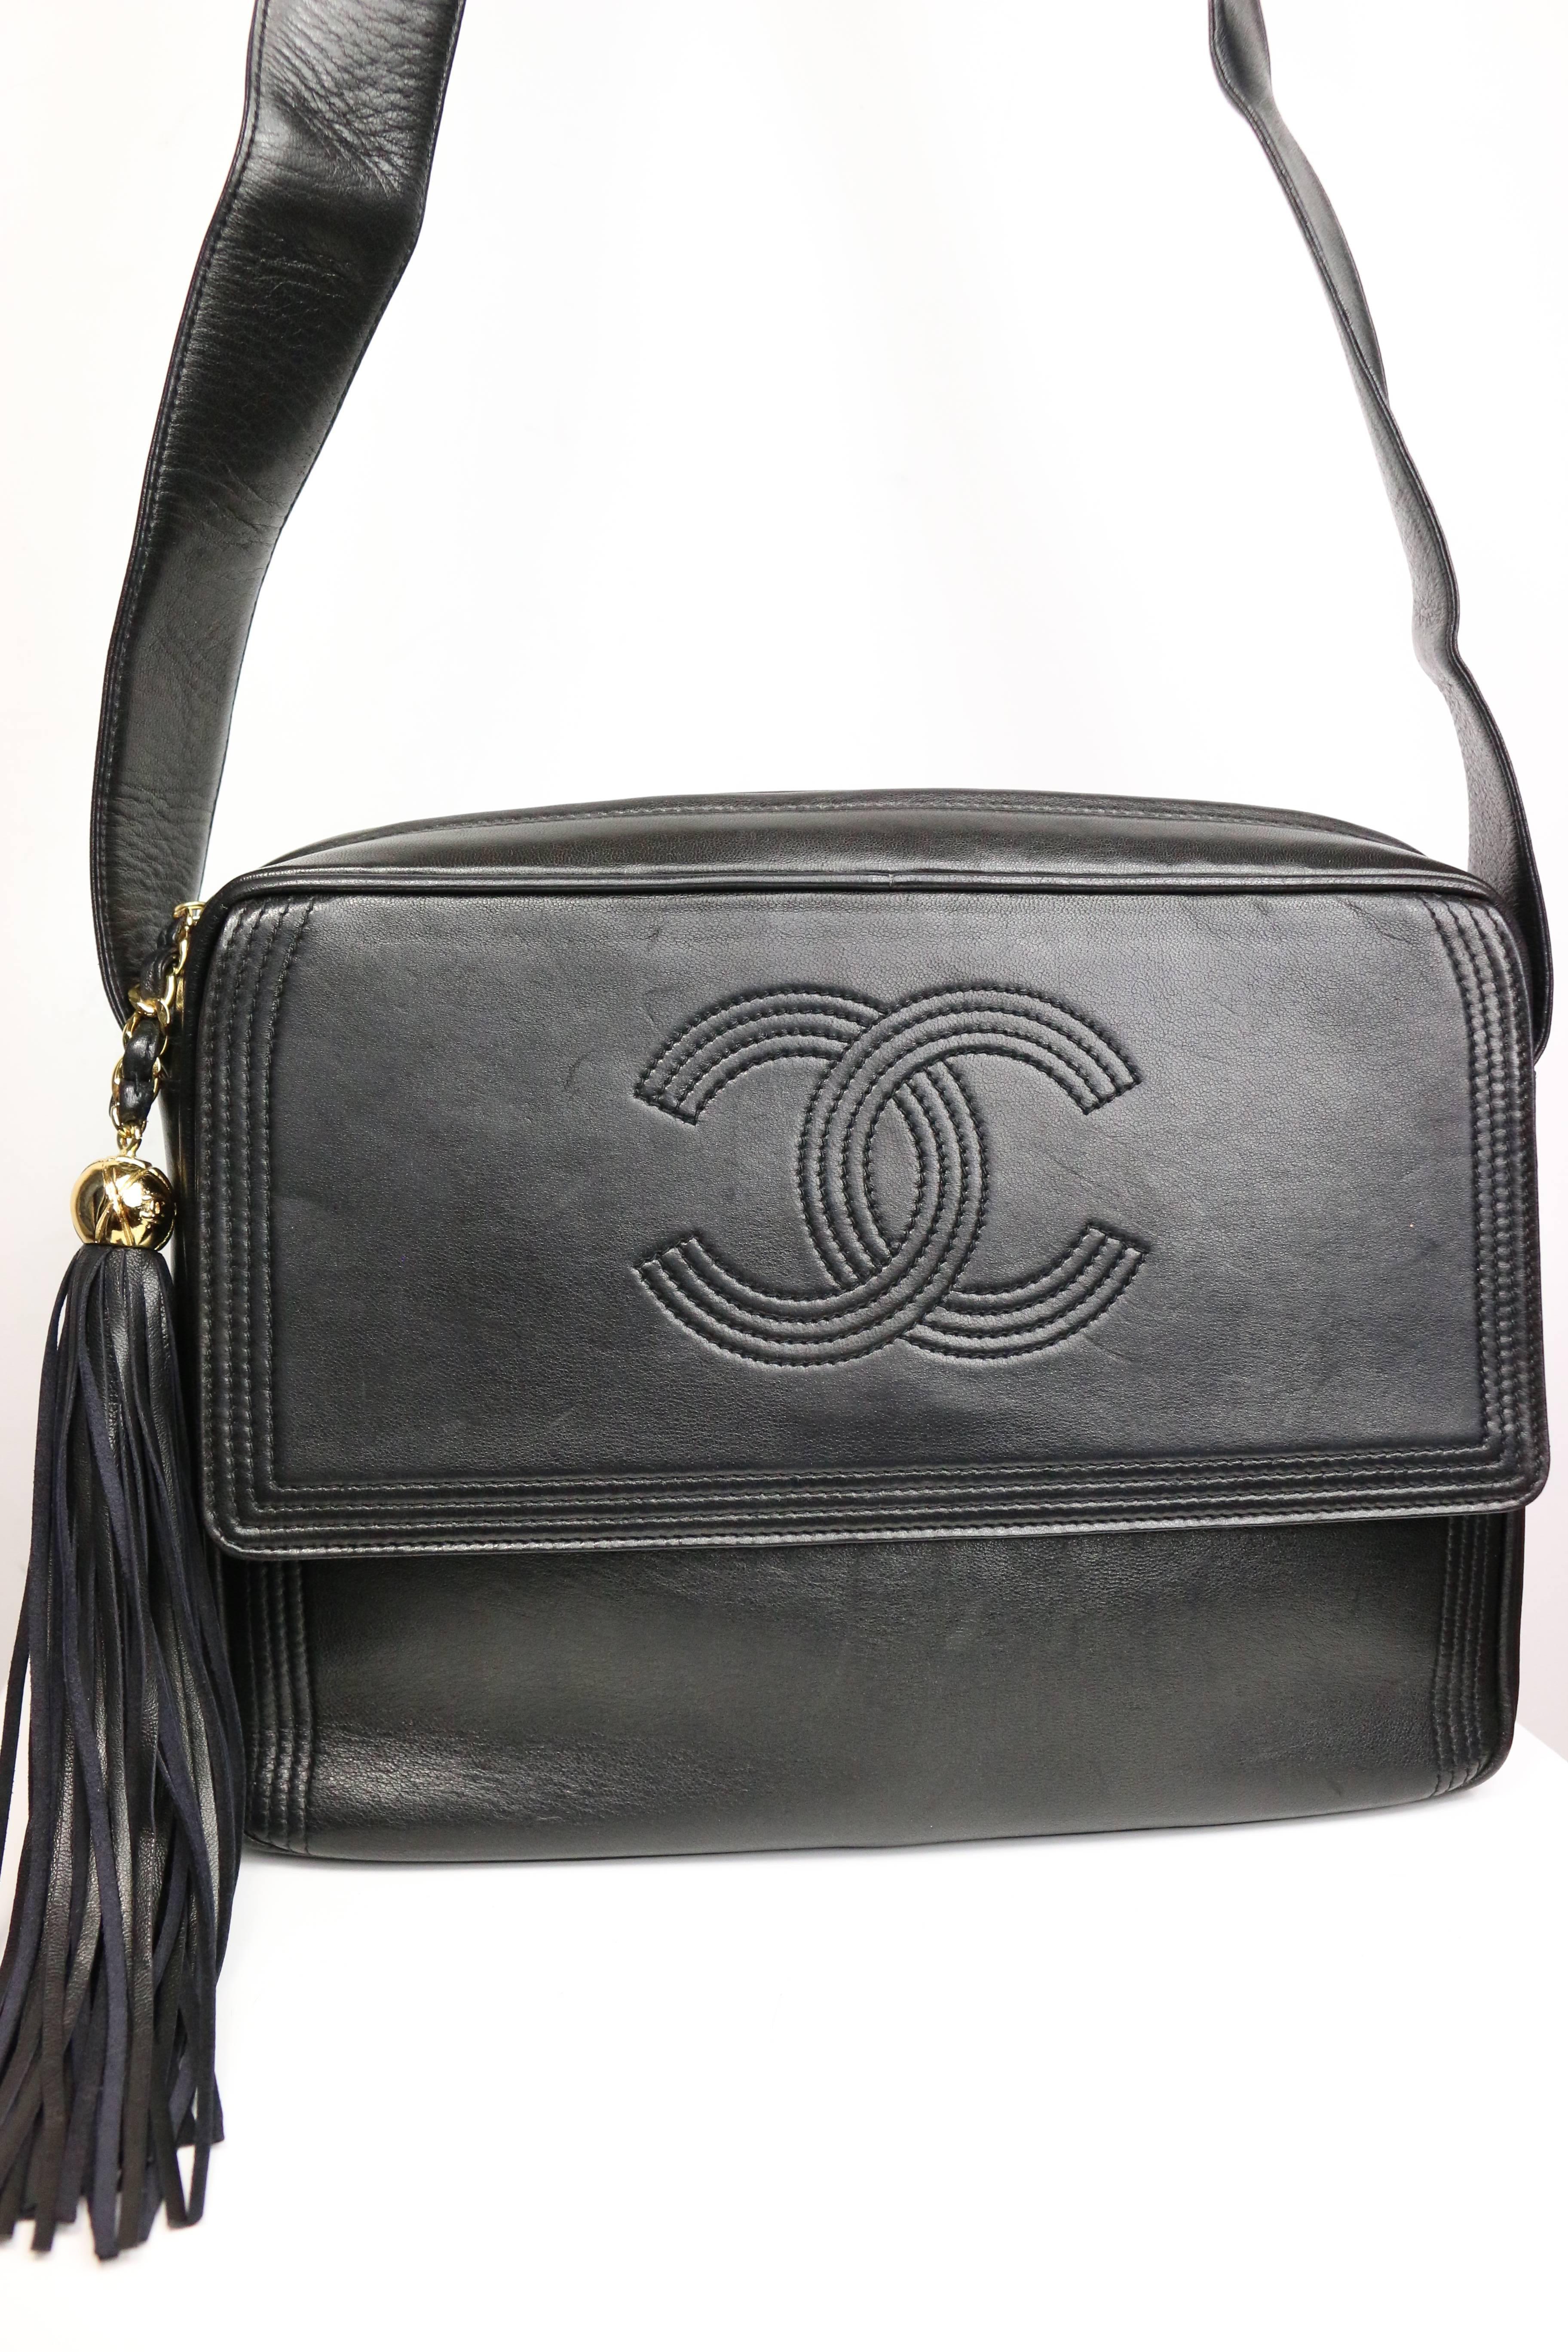 - Vintage 90s Chanel black leather flap bag with tassel. 

- Featuring a 